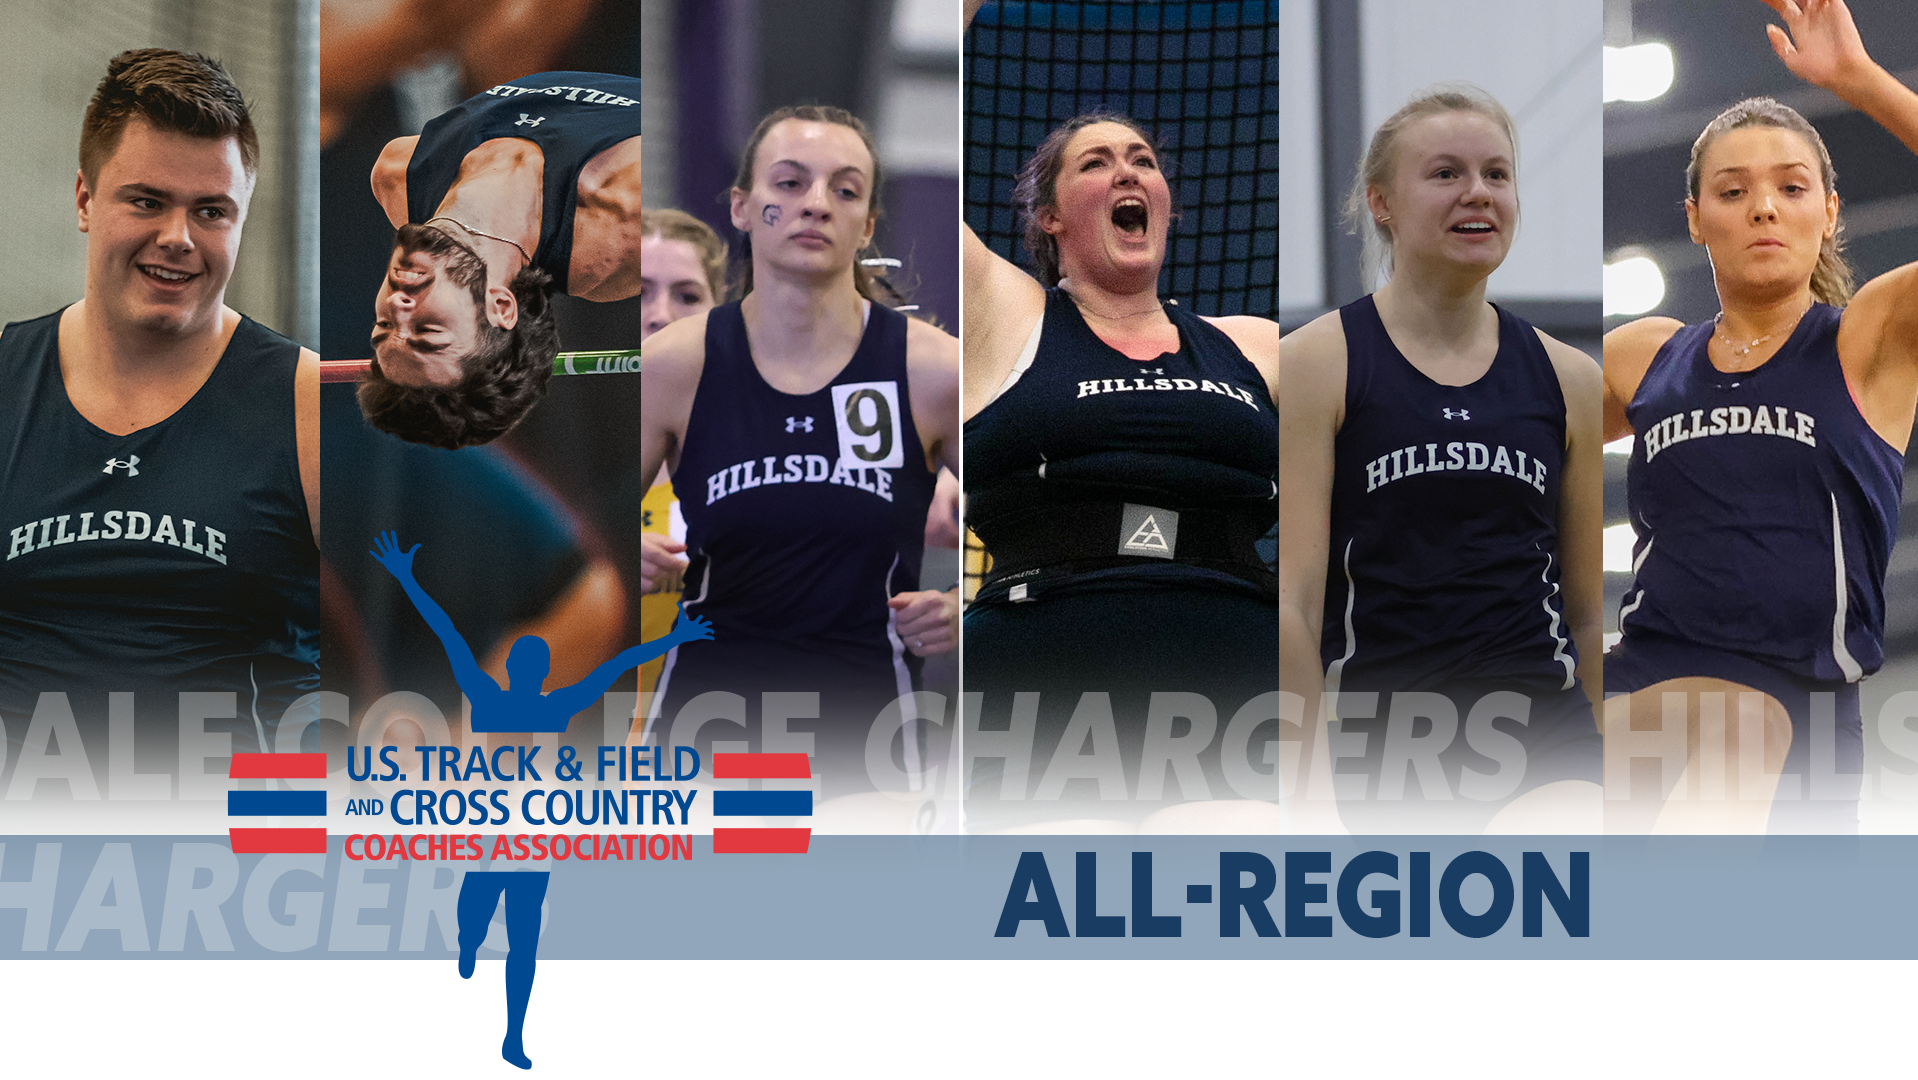 Ten Chargers indoor track and field athletes earn All-Region honors from the USTFCCCA